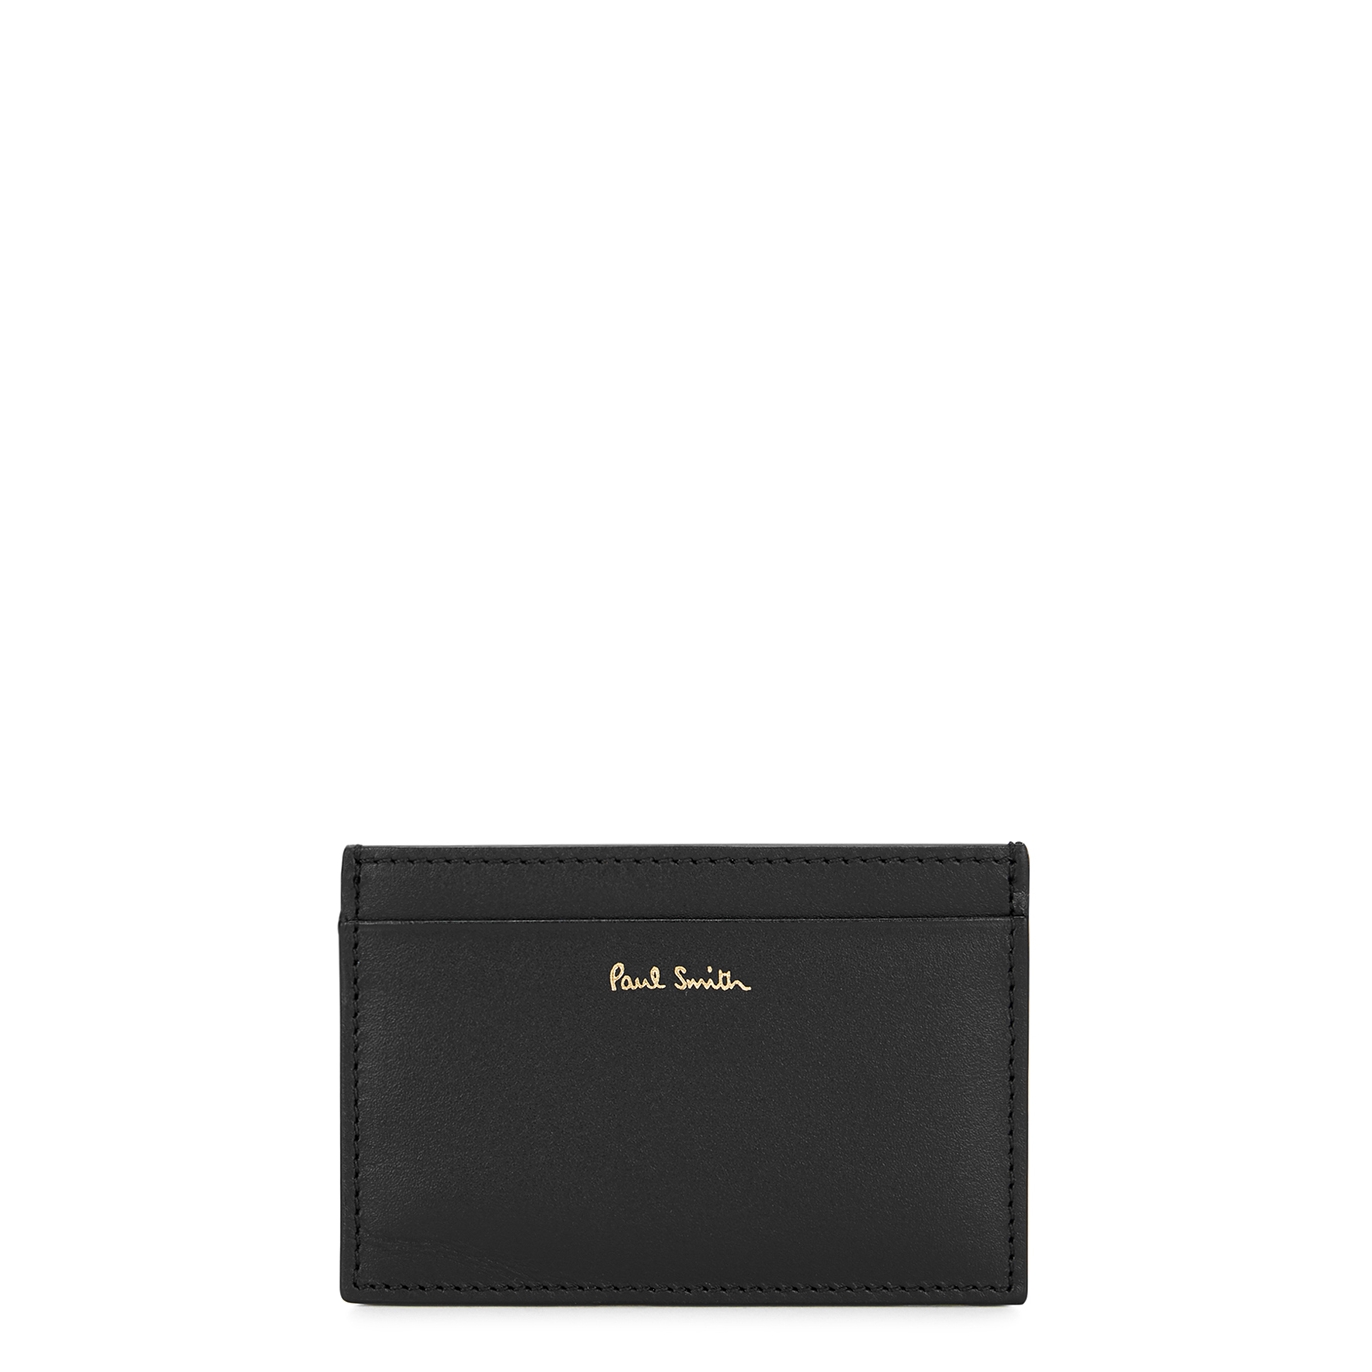 Paul Smith Black Striped Leather Card Holder, Card Holder, Fully Lined